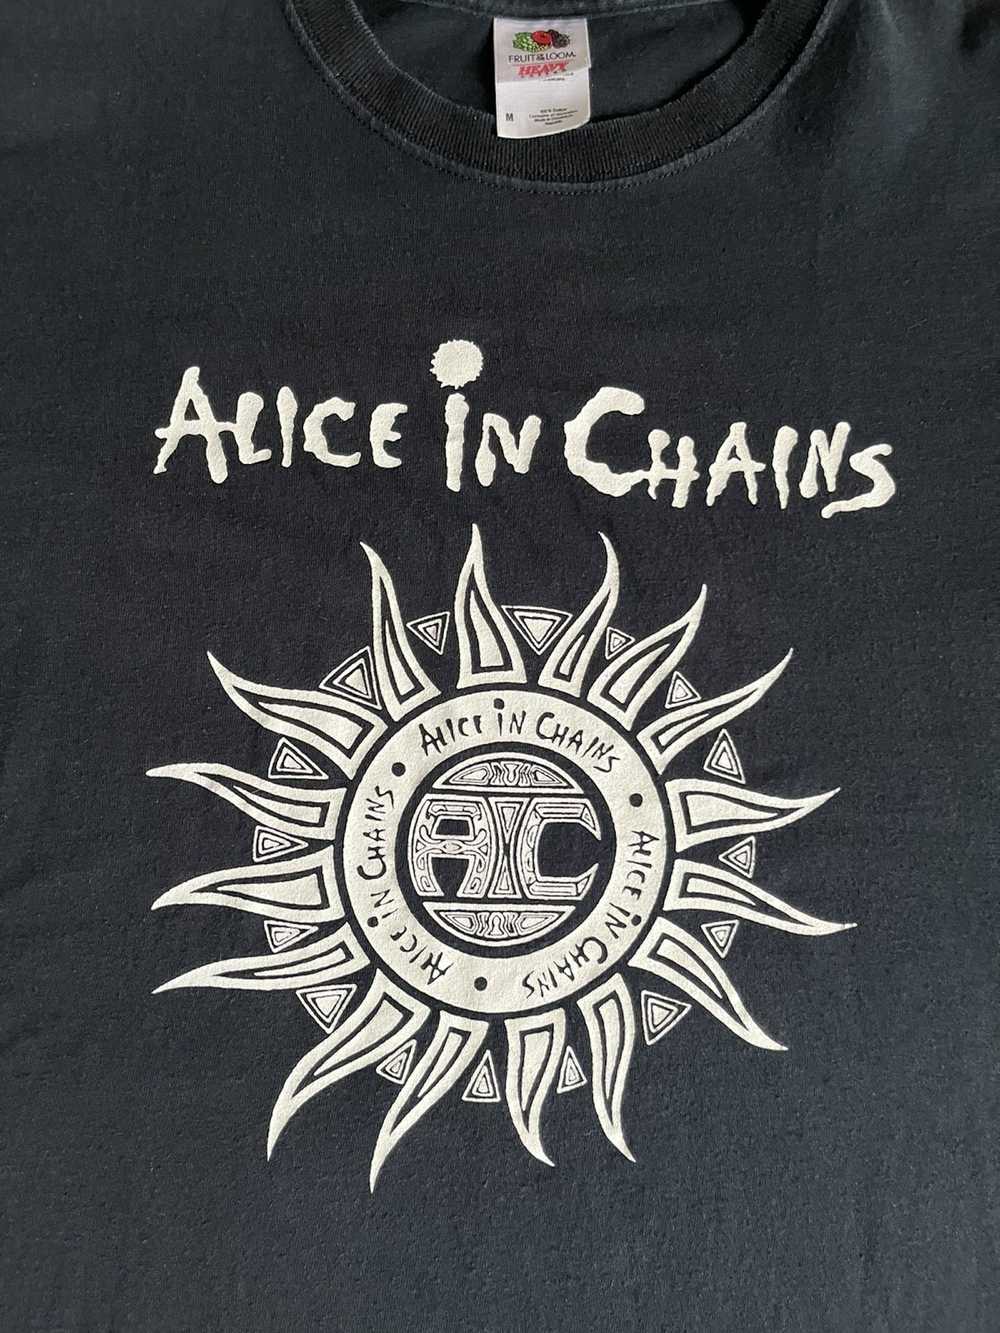 Fruit Of The Loom × Vintage Alice in Chains Shirt - image 2